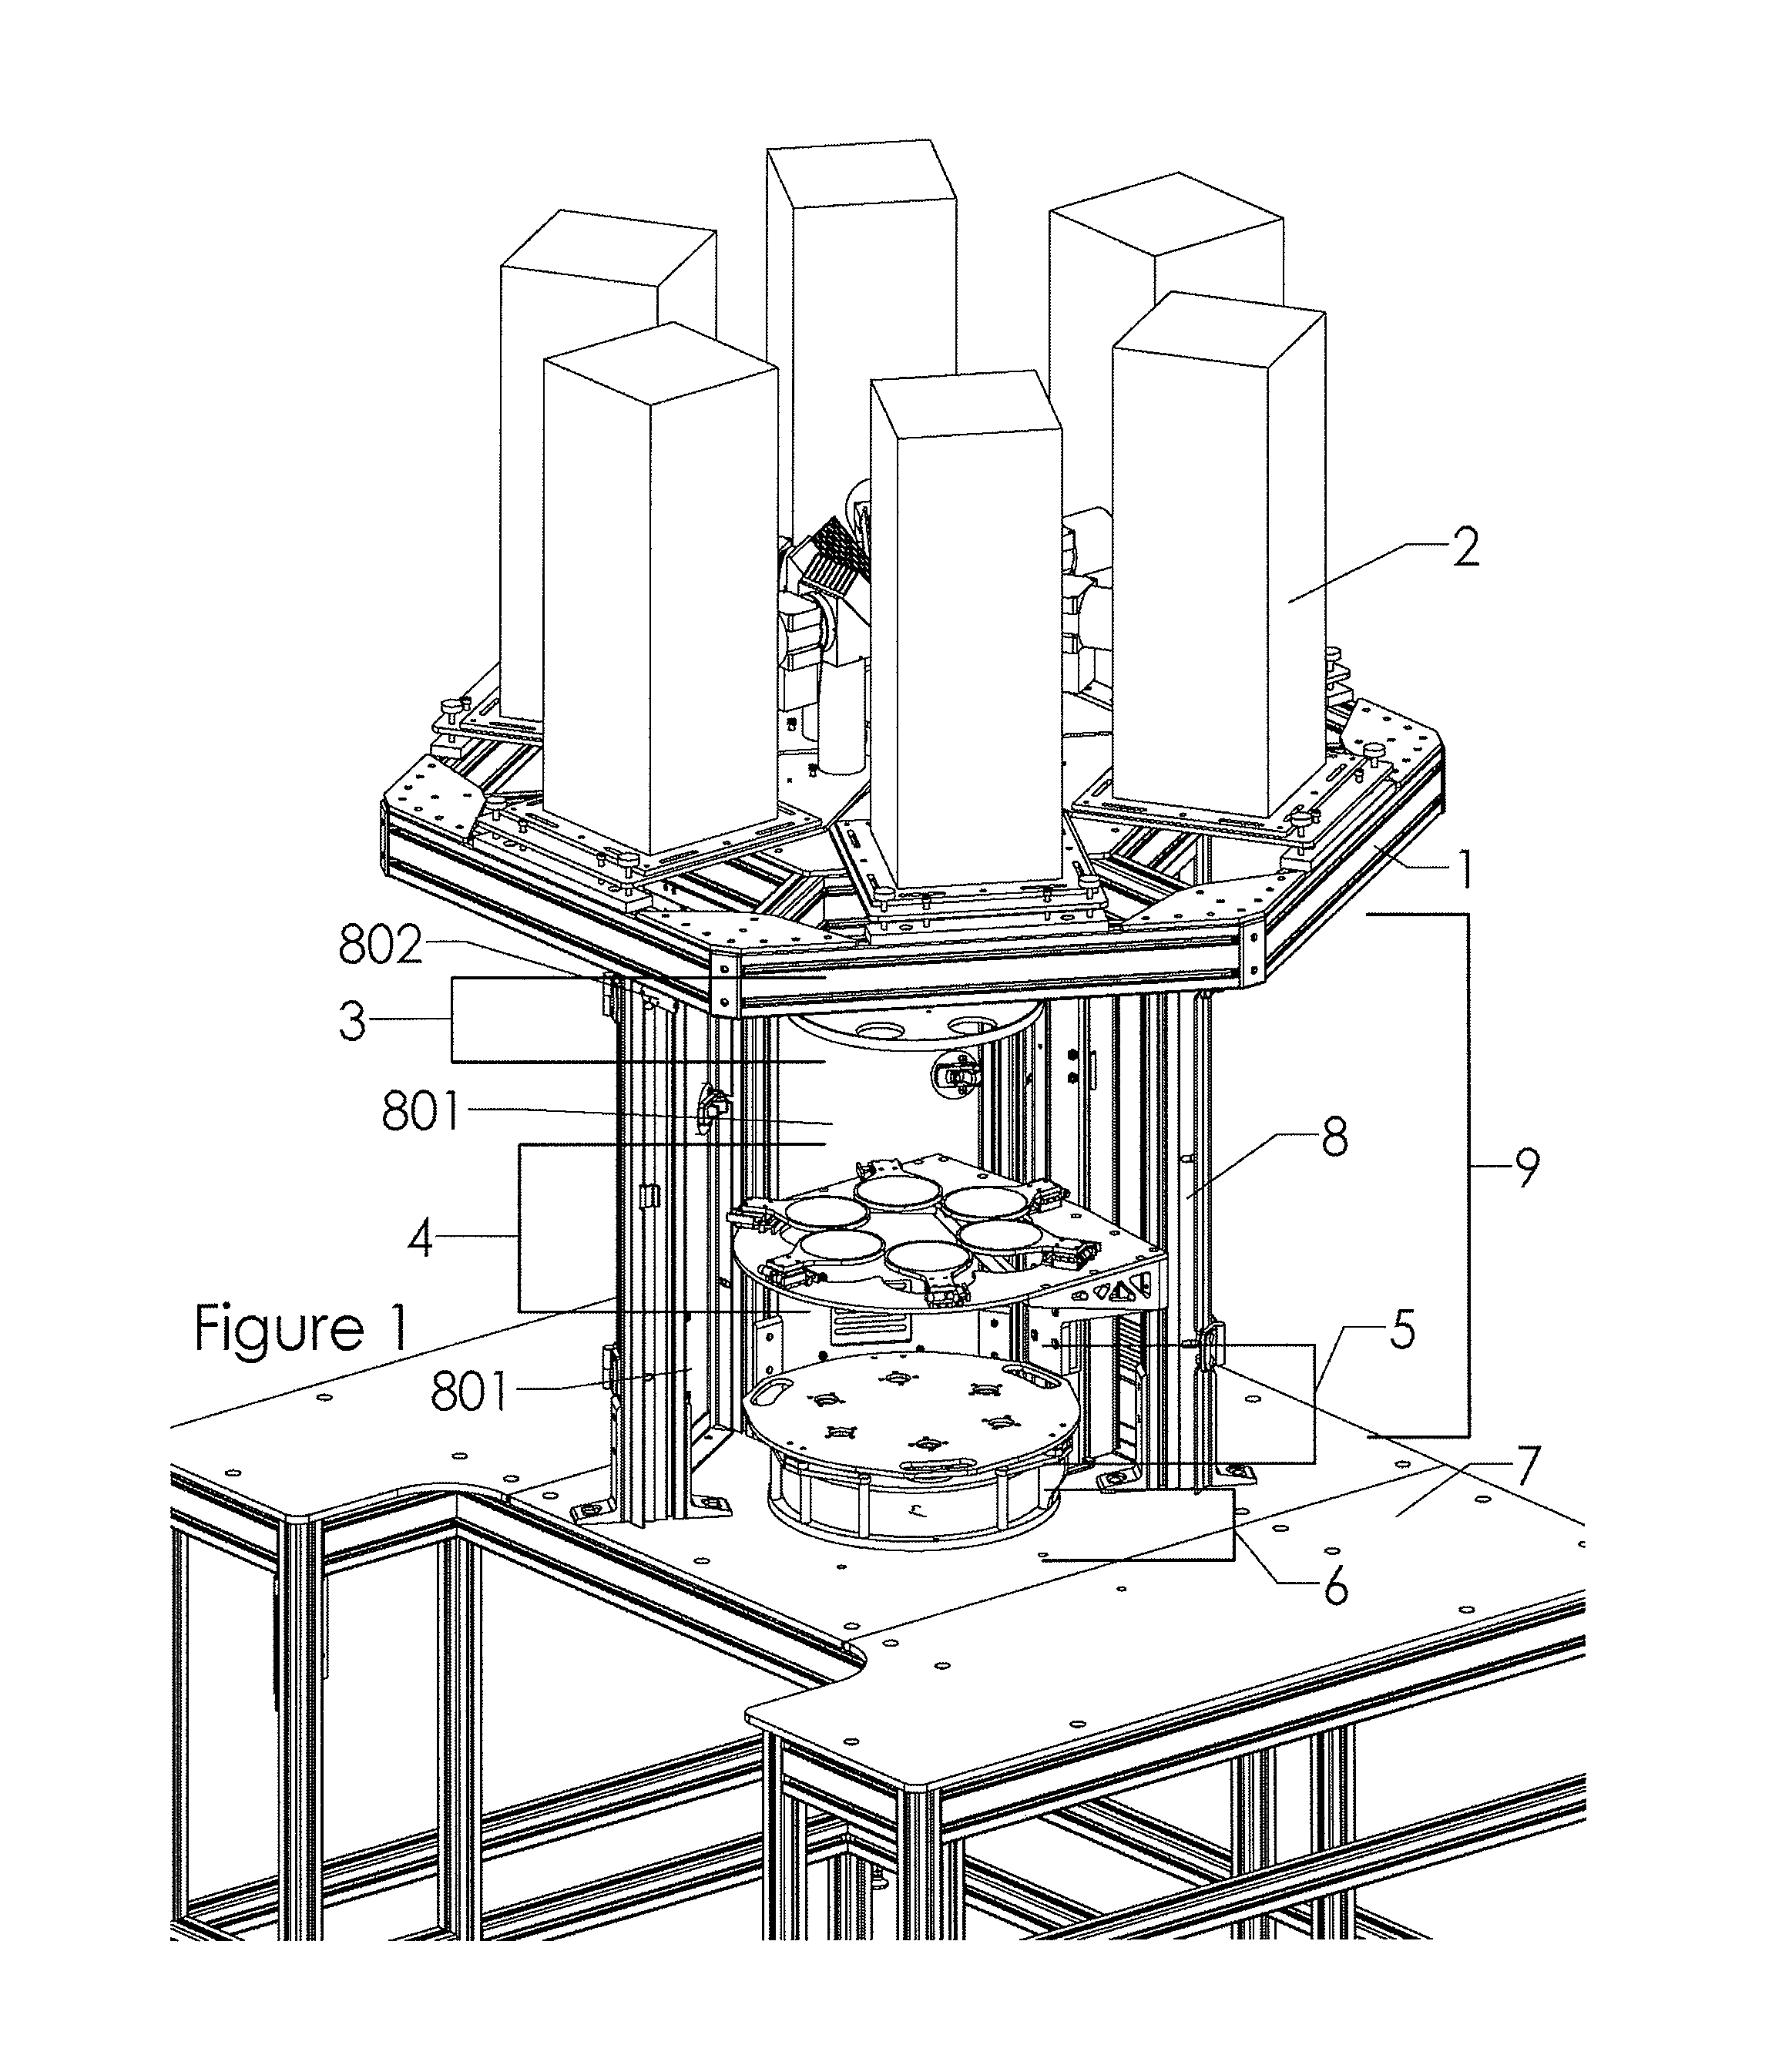 Apparatus and method for highly accelerated life testing of solar cells